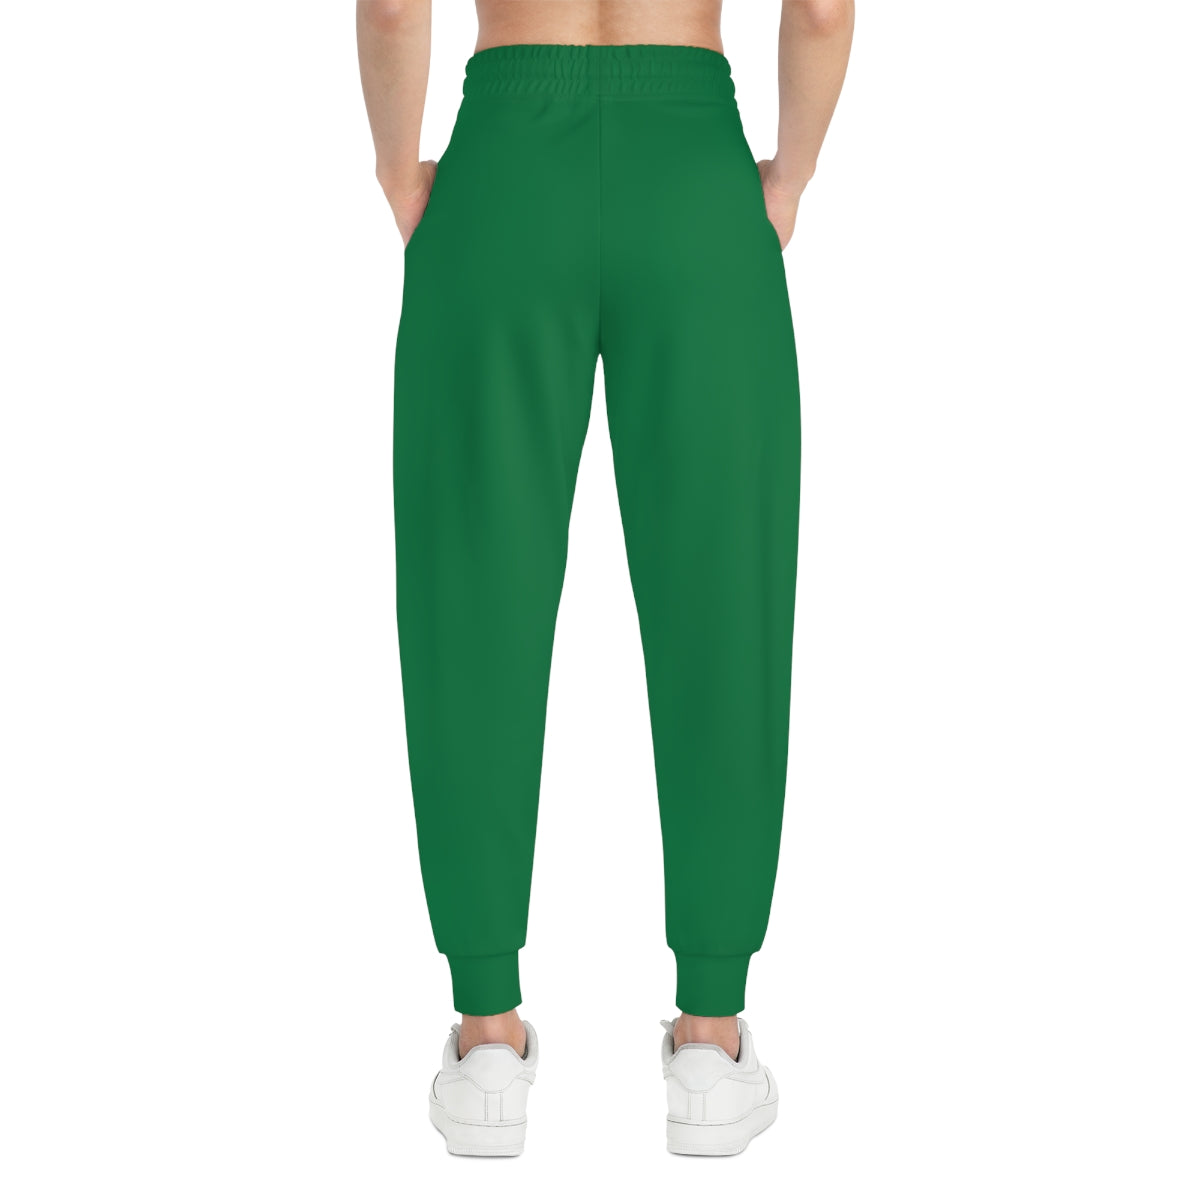 BIW Green/WHT Athletic Joggers